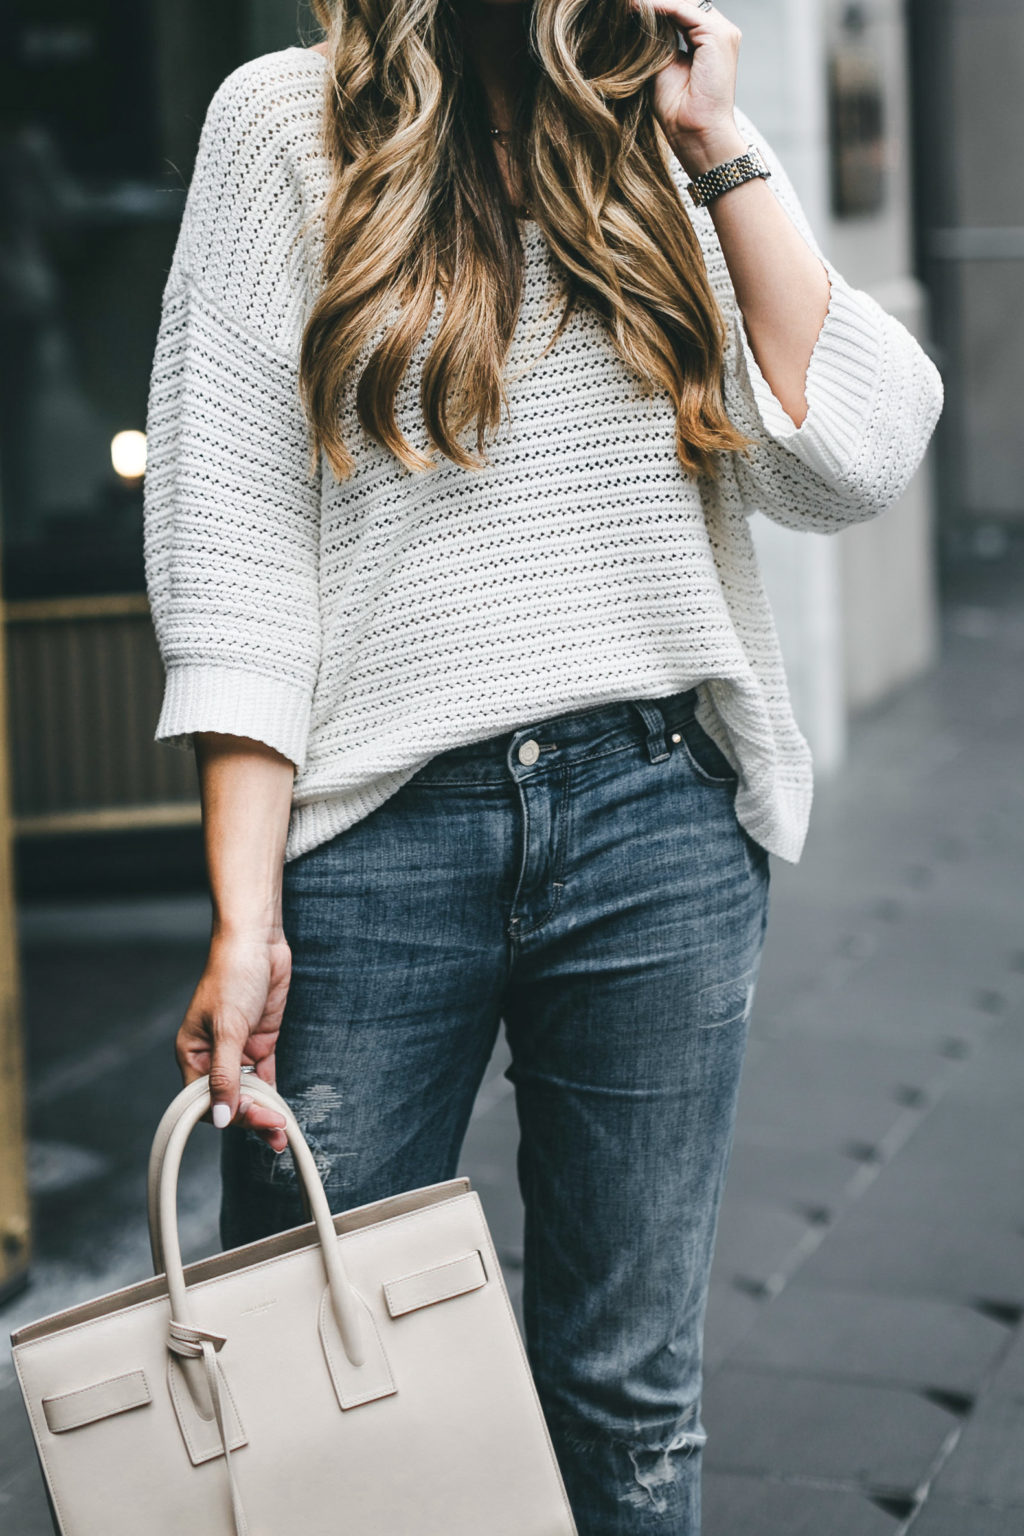 White Sweater and Saint Laurent Bag